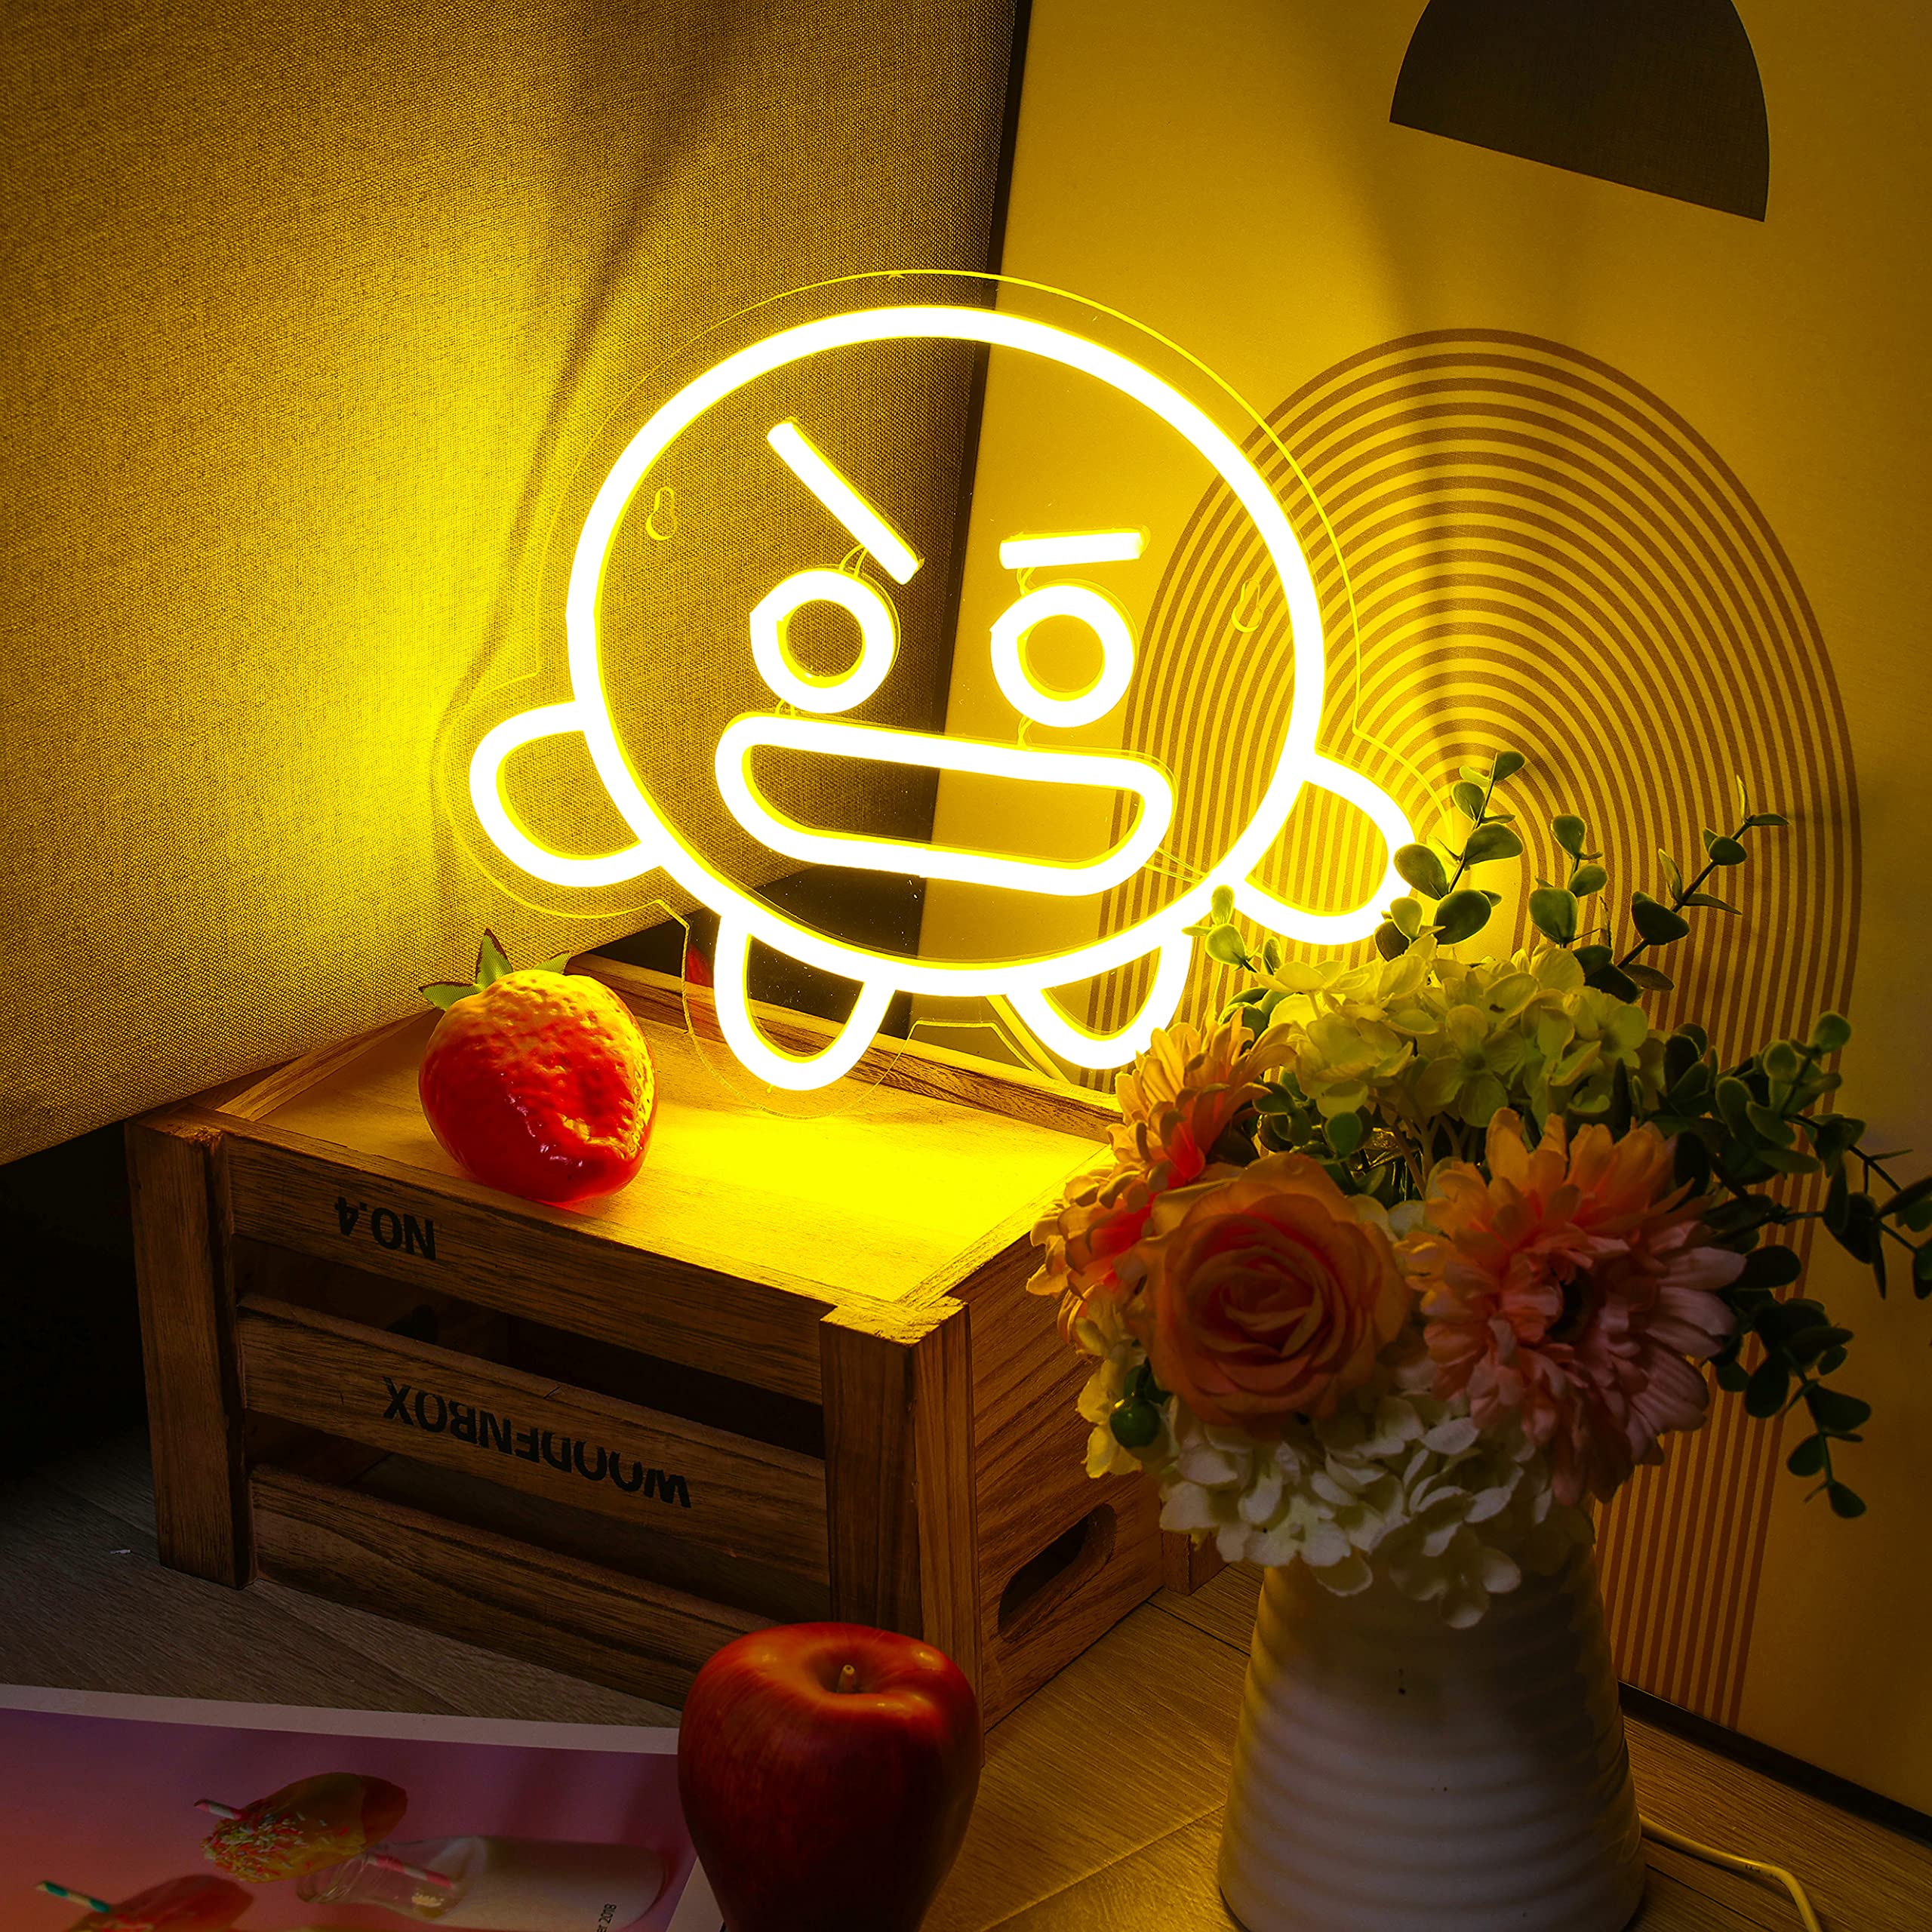 Amazon.com : Smiley Face Neon Sign USB Operated for Bedroom, Neon Light Dimmable, Anime Neon Sign for Wall Decor : Tools & Home Improvement